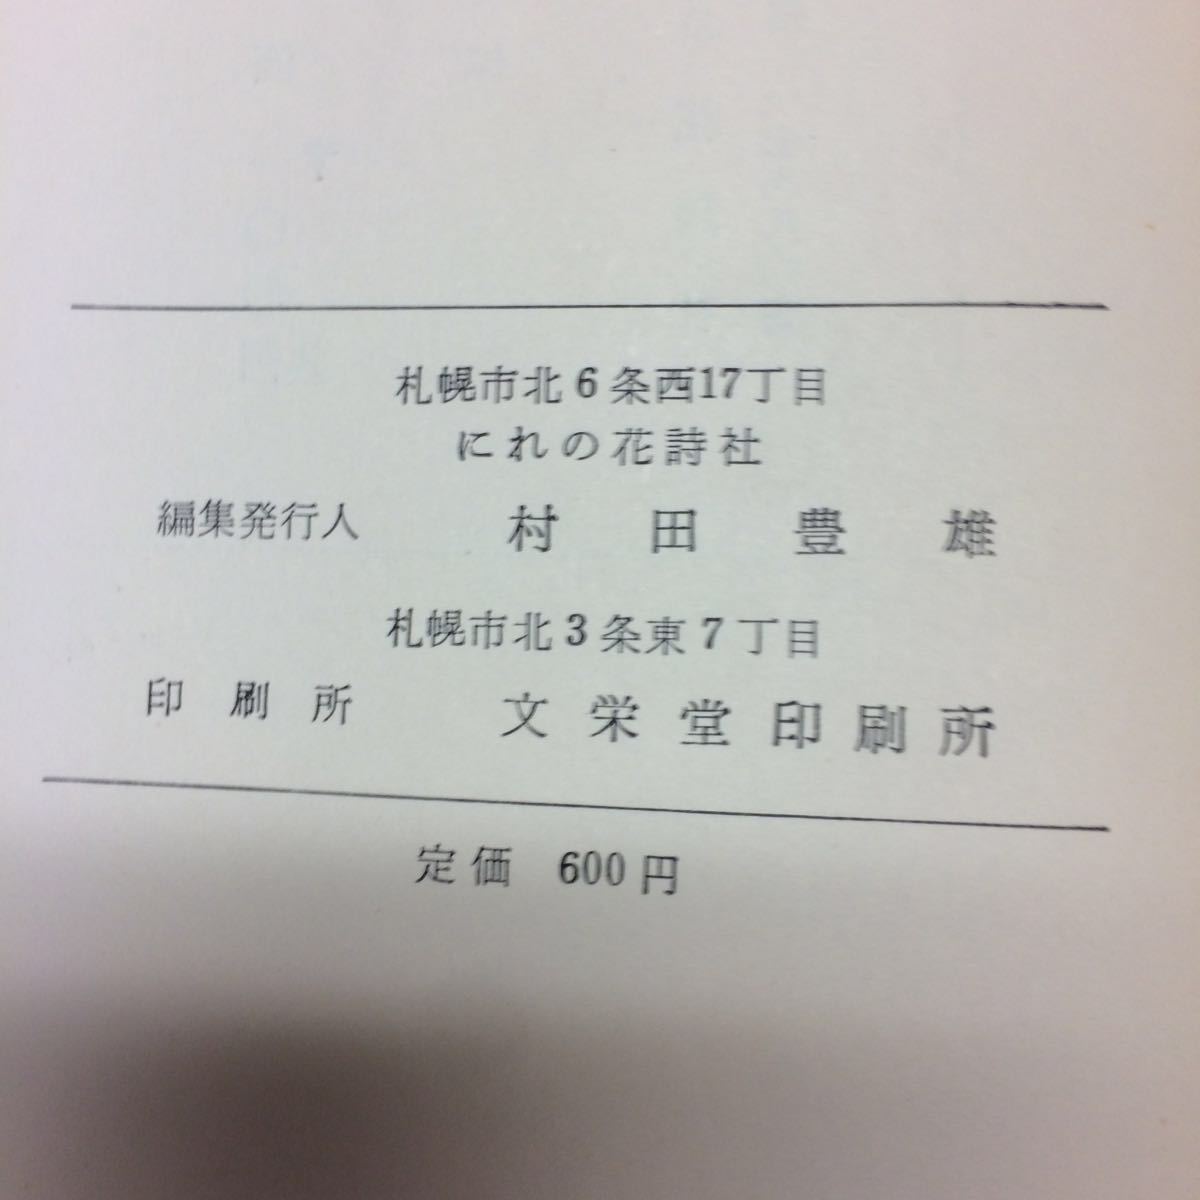 Y11-81 collection of songs [. rock .] elm. flower poetry company editing * issue person /. rice field Toyo ( Hokkaido university attached library office work part length Showa era 40 year issue ground. . light . road .. autumn 